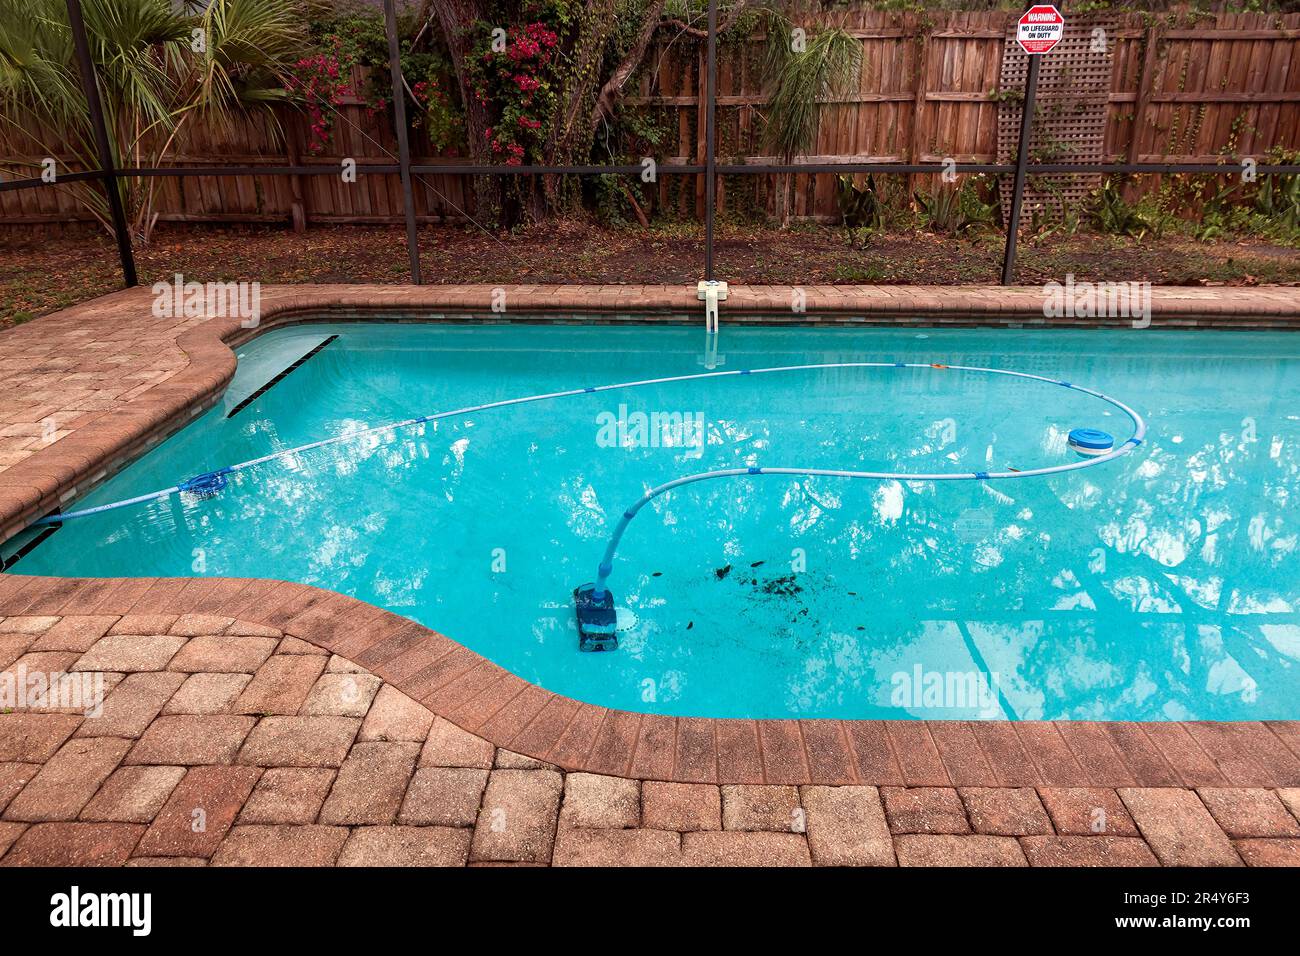 Backyard swimming pool robotic cleaner vacuums the bottom of the pool. Stock Photo